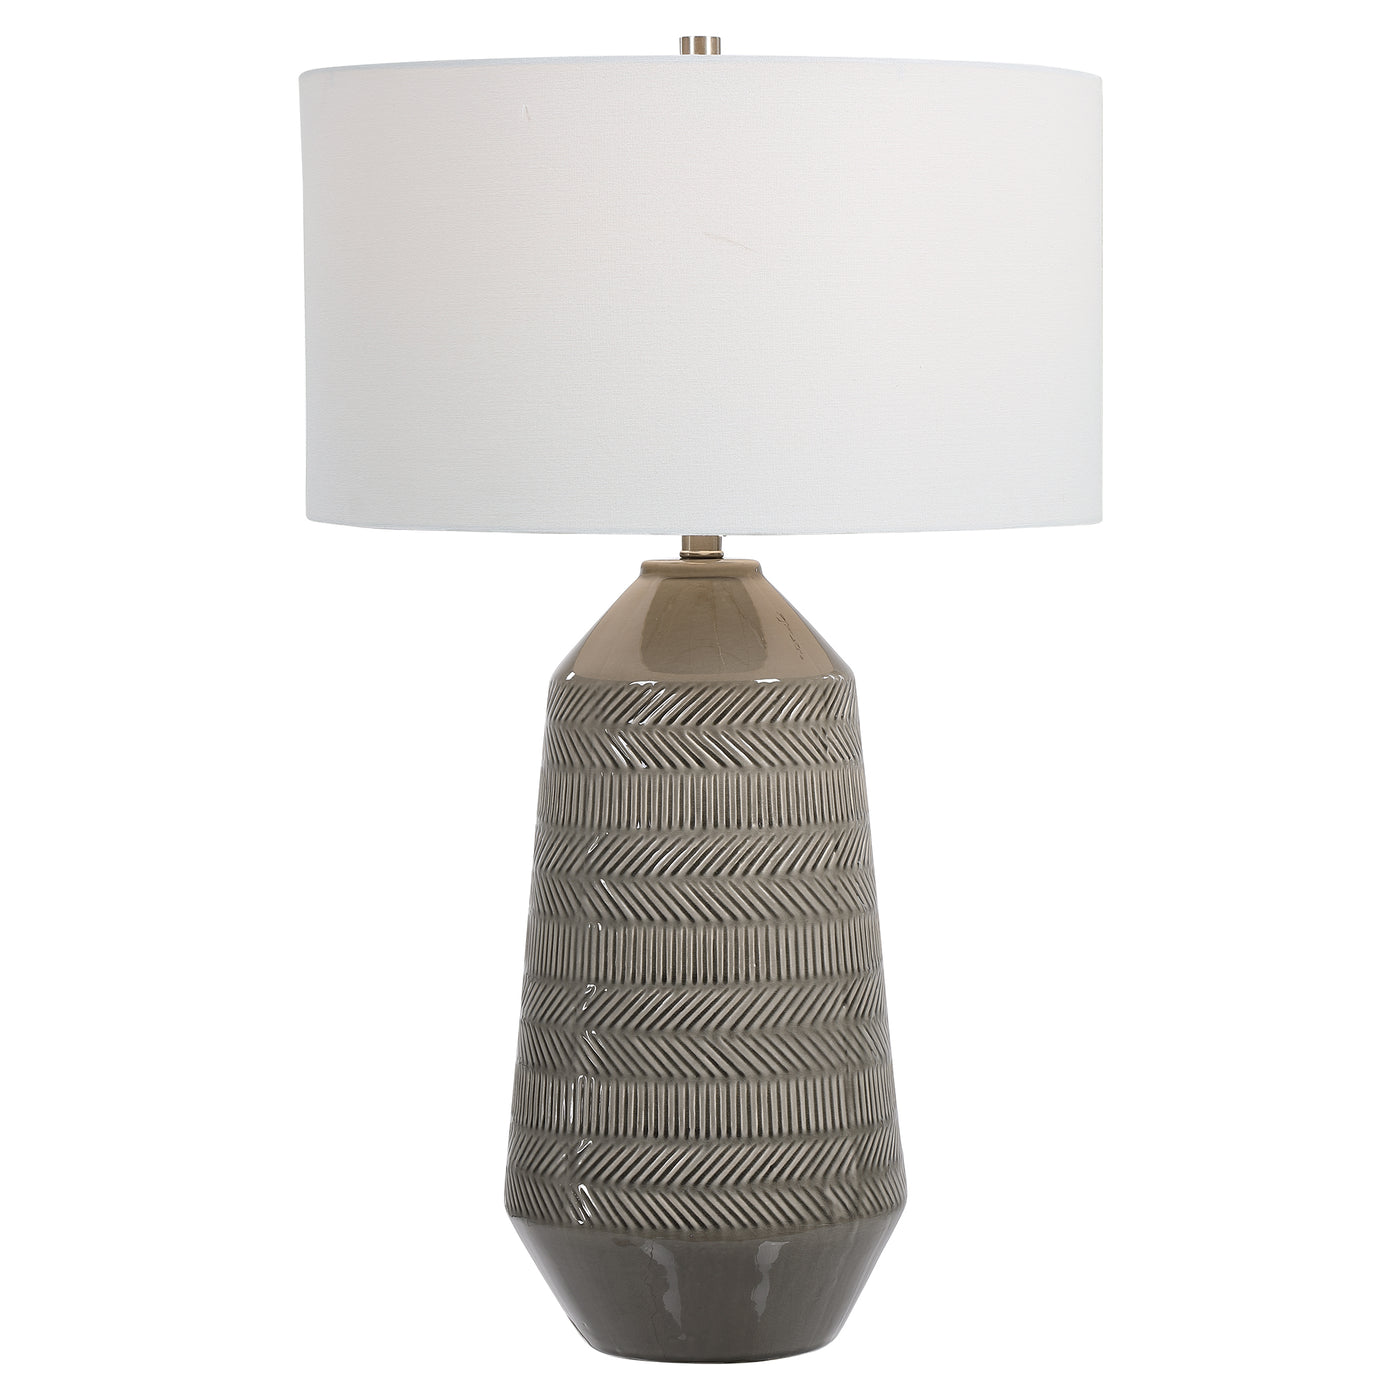 Showcasing A Classic Carved Herringbone Pattern, This Ceramic Table Lamp Is Finished In A Versatile Soft Gray Glaze With B...